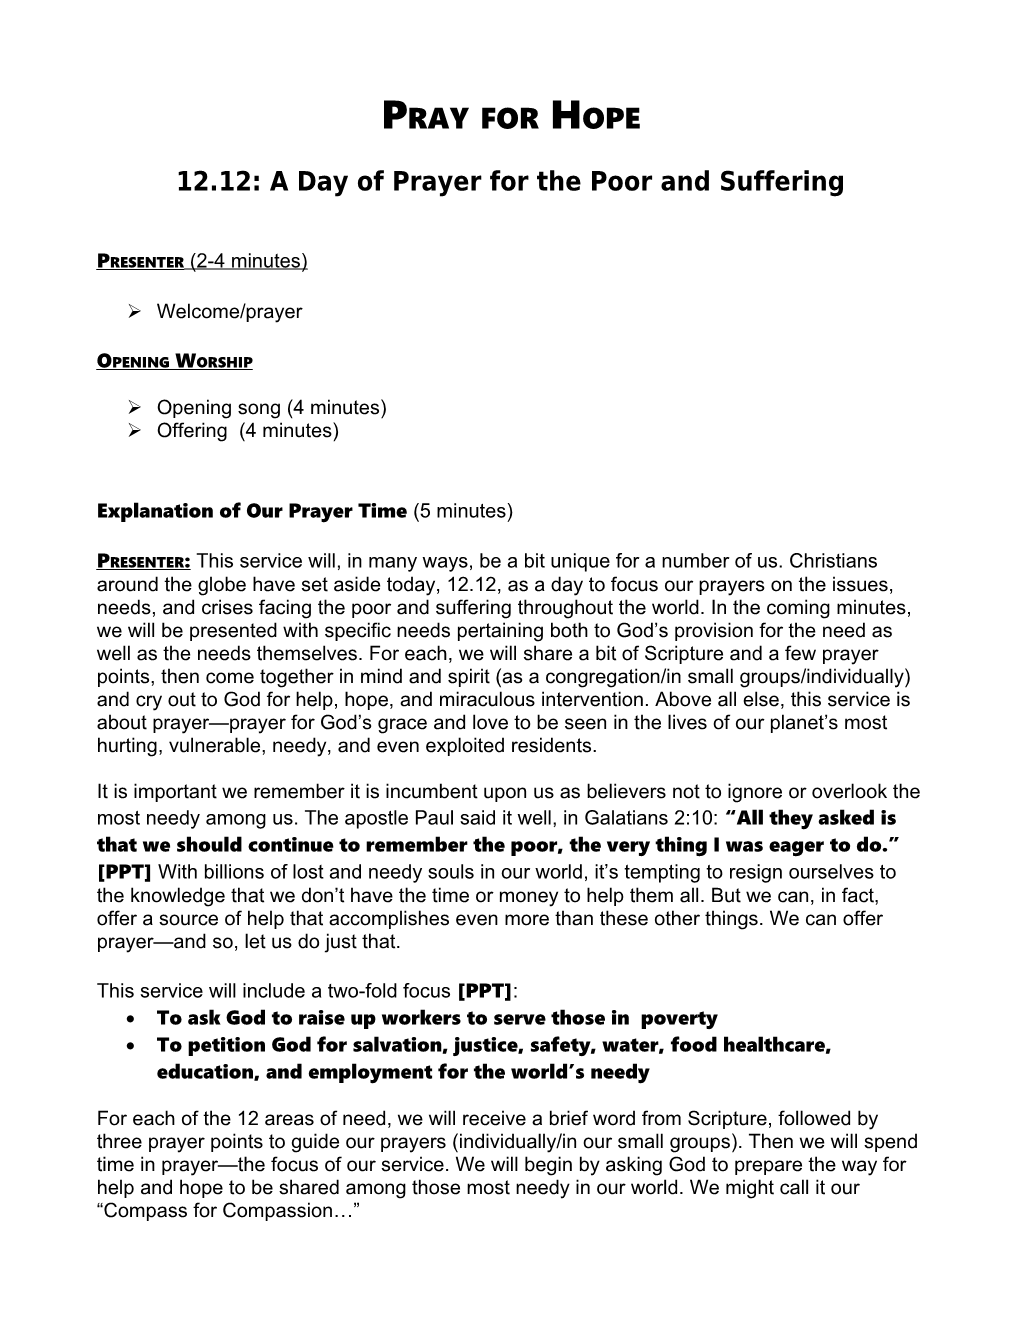 12.12: a Day of Prayer for the Poor and Suffering